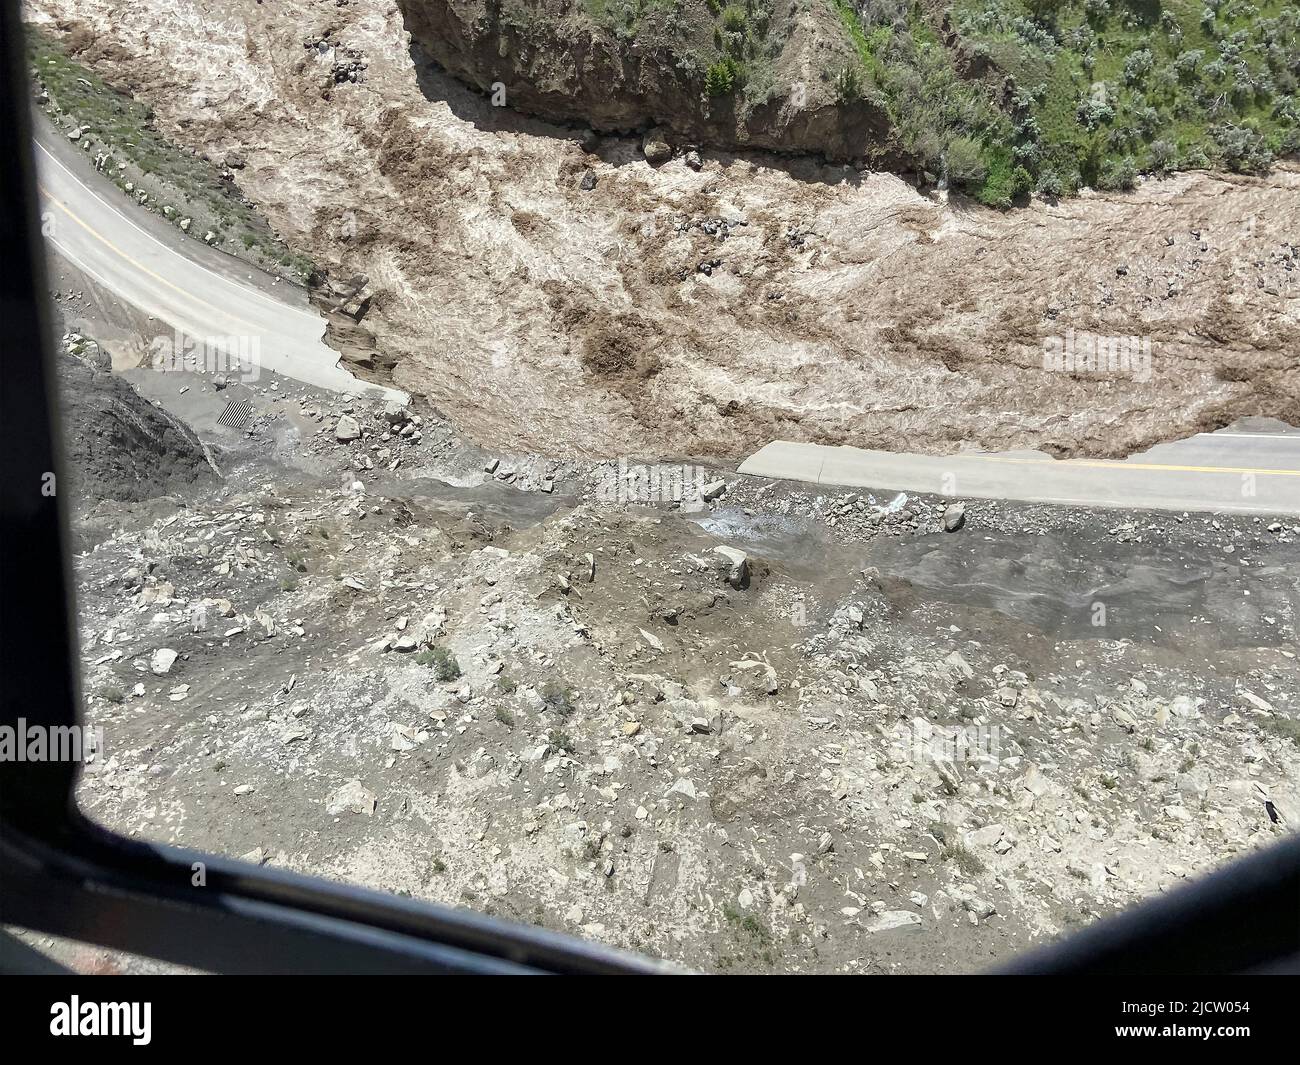 Yellowstone, United States. 13th June, 2022. The north entrance road from Gardiner to Mammoth is washed out after record rains and snow melt caused destructive floods closing Yellowstone National Park at the start of the high season, June 13, 2022 in Yellowstone, Montana. Credit: Doug Kraus/NPS Photo/Alamy Live News Stock Photo